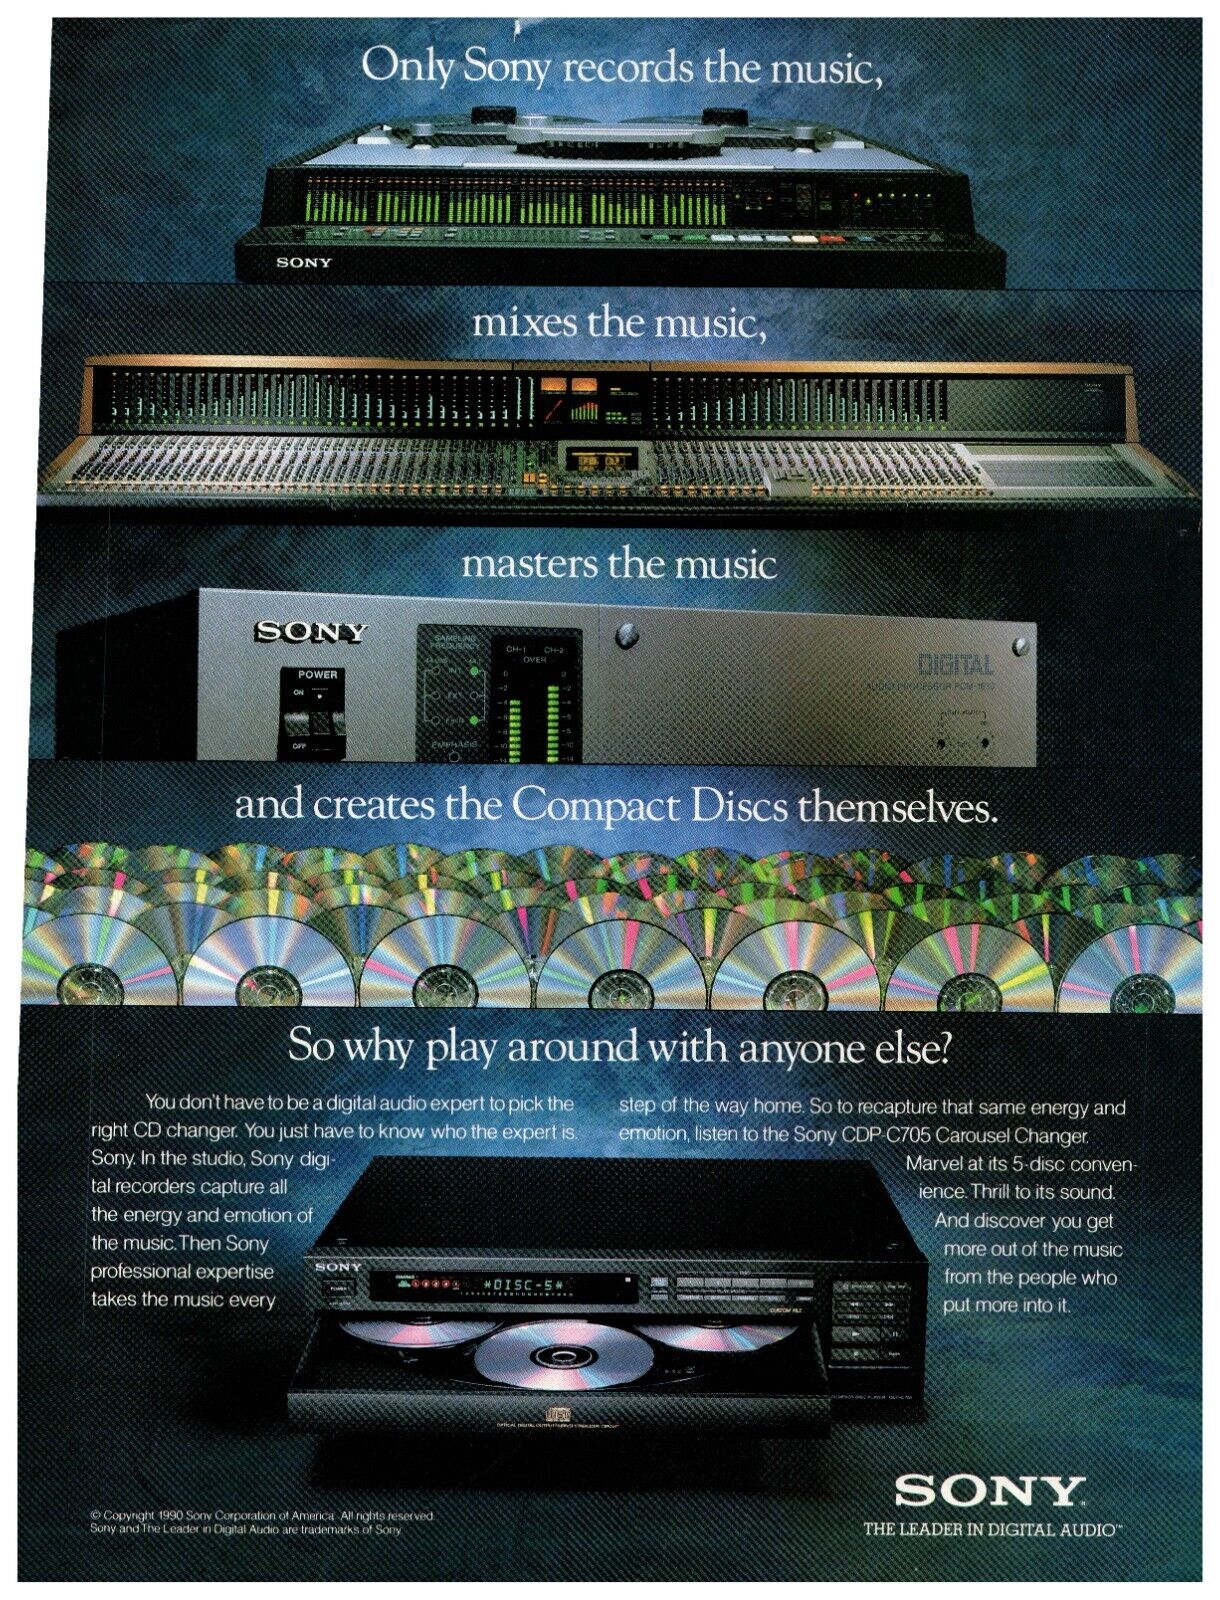 1991 Sony CDP-C705 CD Carousel Changer Player vintage PRINT AD 8x10